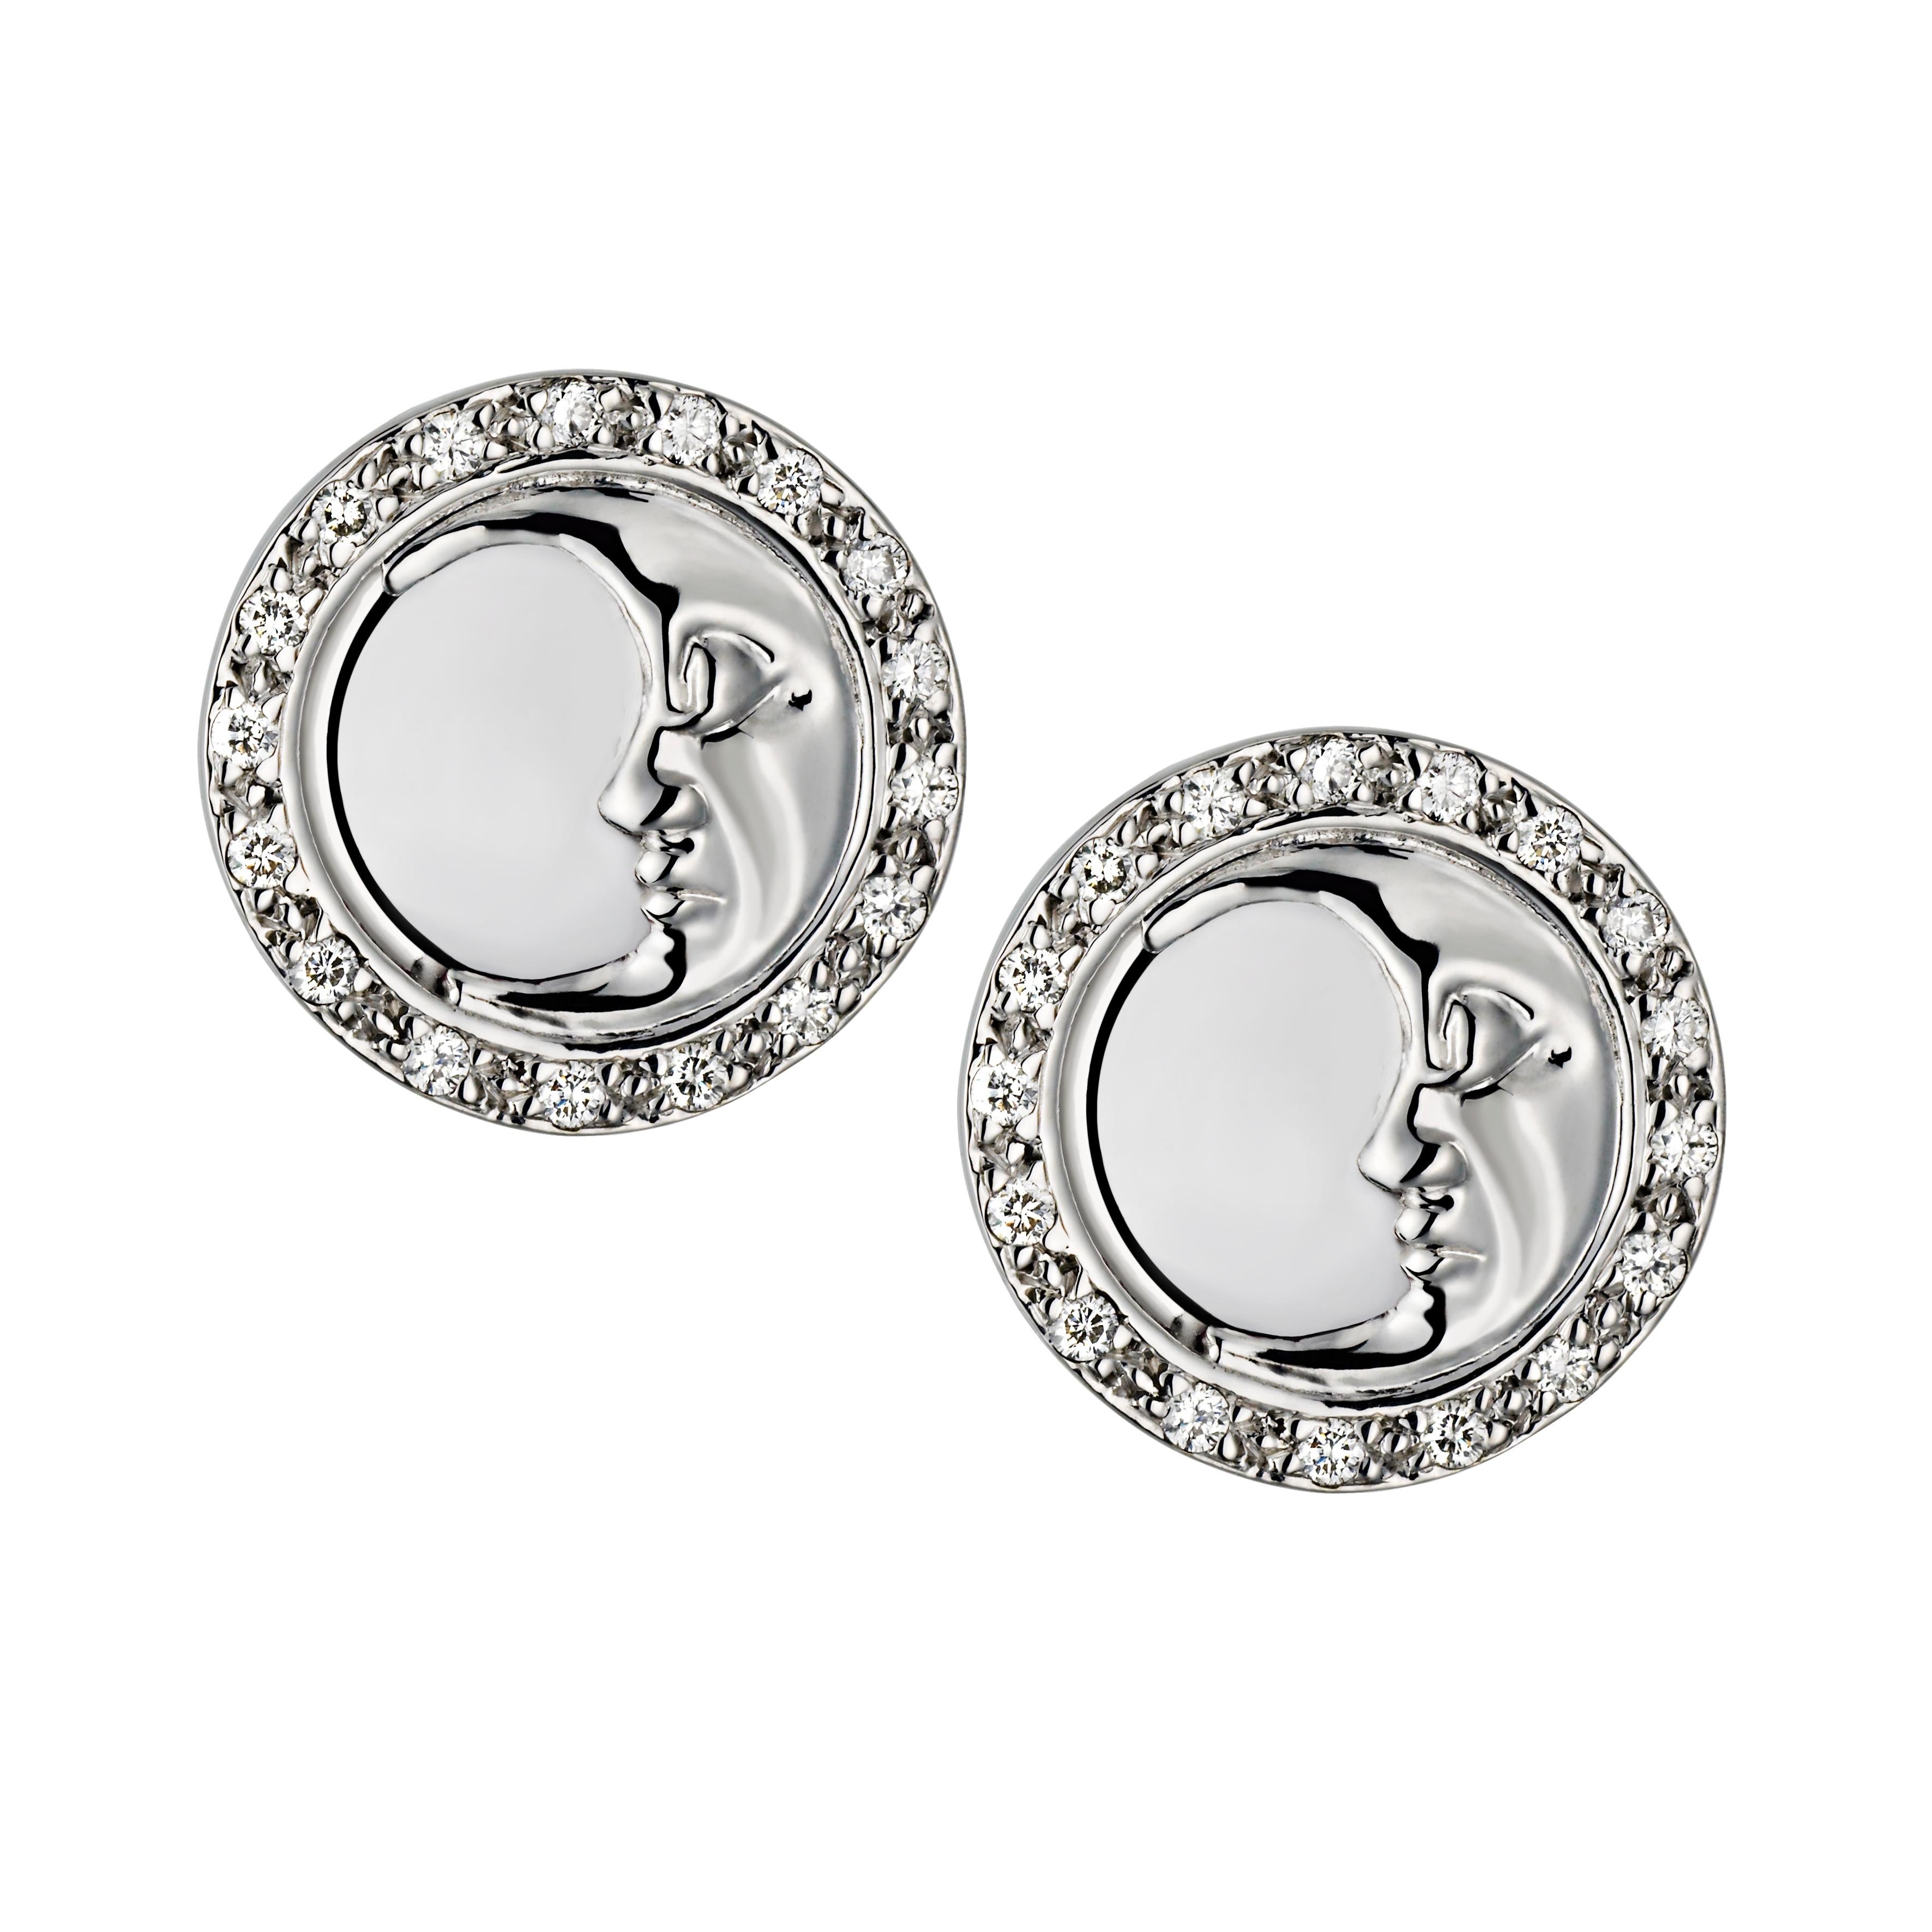 The sun and moon studs sits on the ear and are each pave set with 0.15ct of diamonds,weighing 0.30ct in total. The moon stud is pave set with white diamonds to represent the night sky and the sun stud is pave set with natural canary yellow diamonds